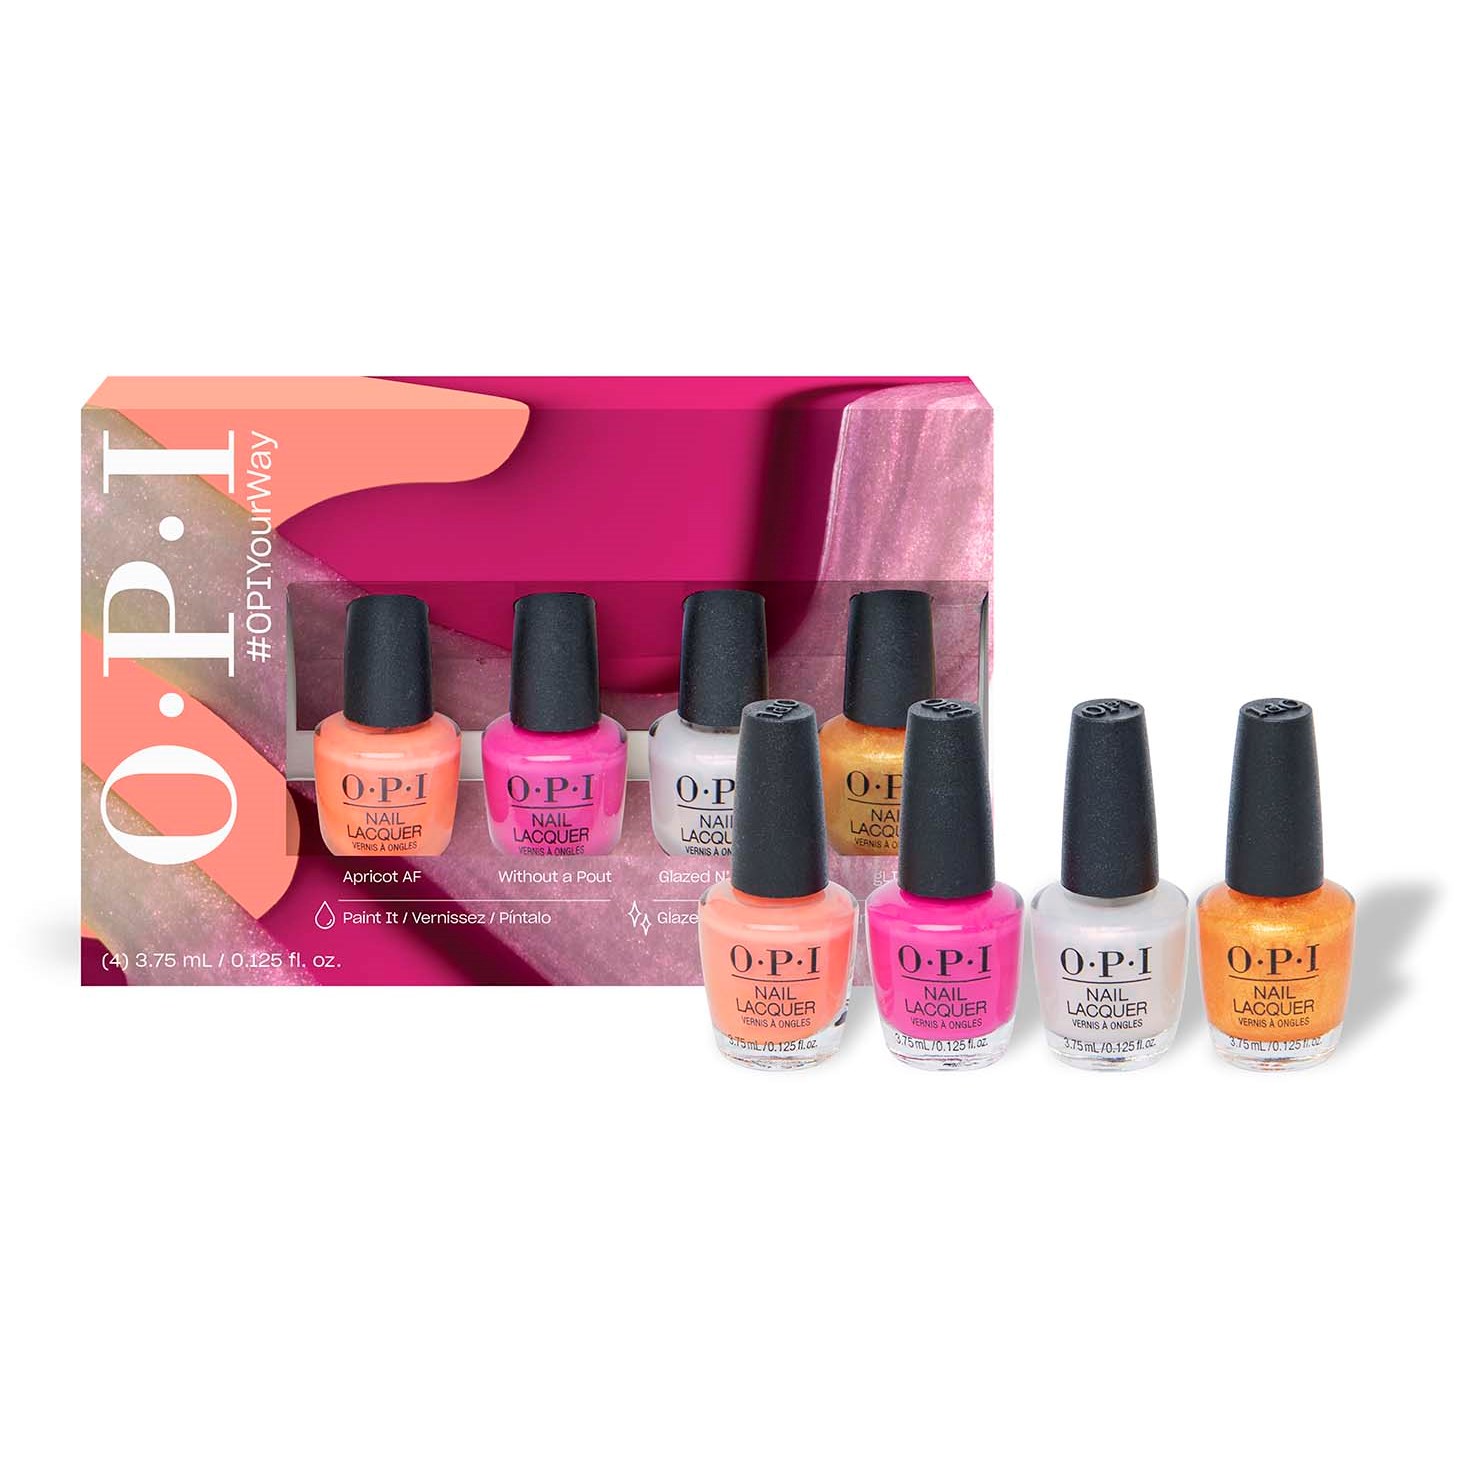 Opi Nail Lacquer Your Way Mini-Pack